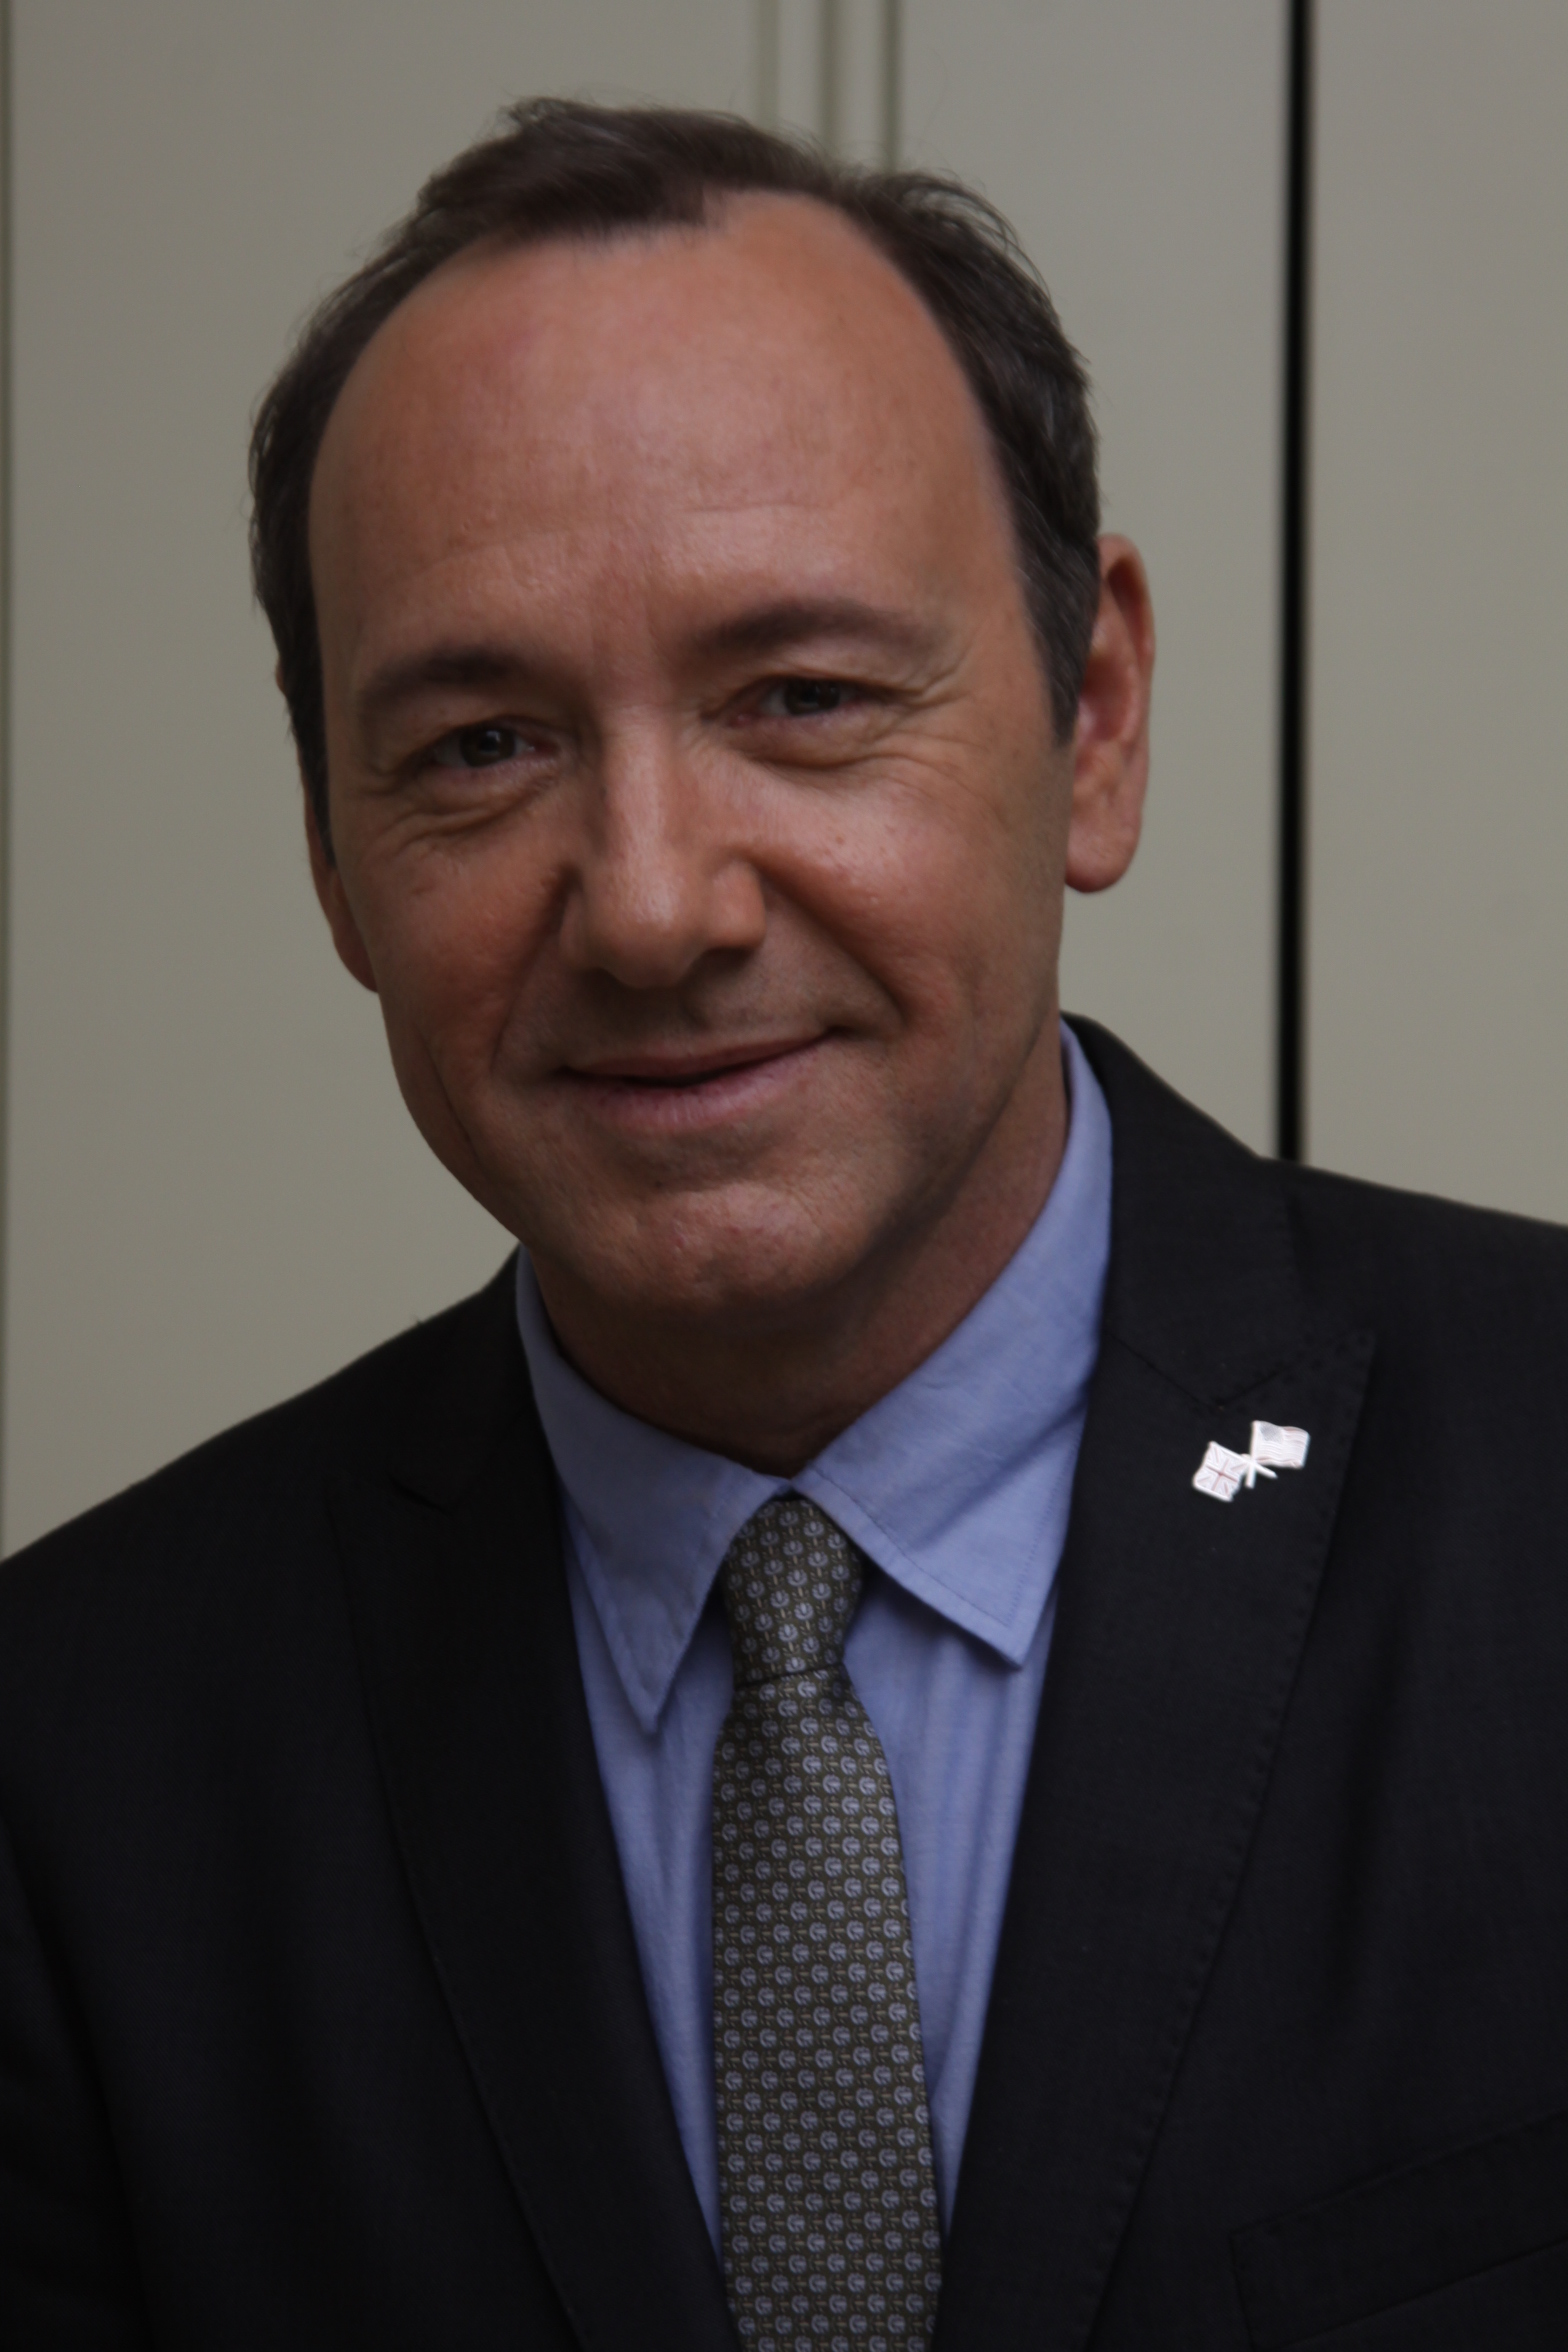 kevin-spacey-young